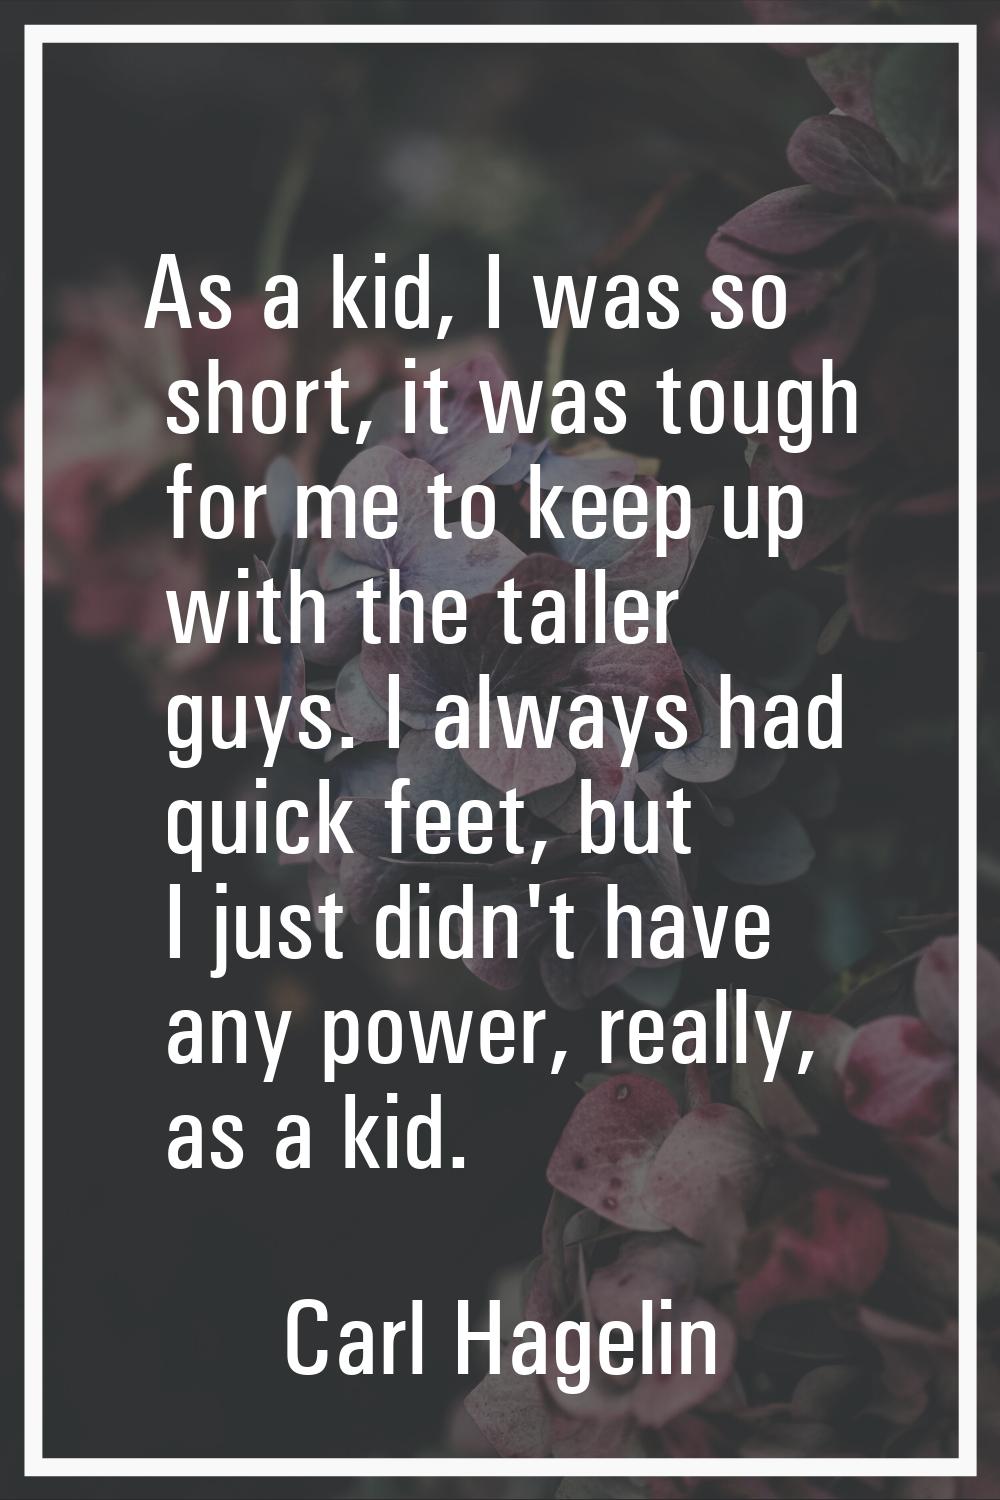 As a kid, I was so short, it was tough for me to keep up with the taller guys. I always had quick f